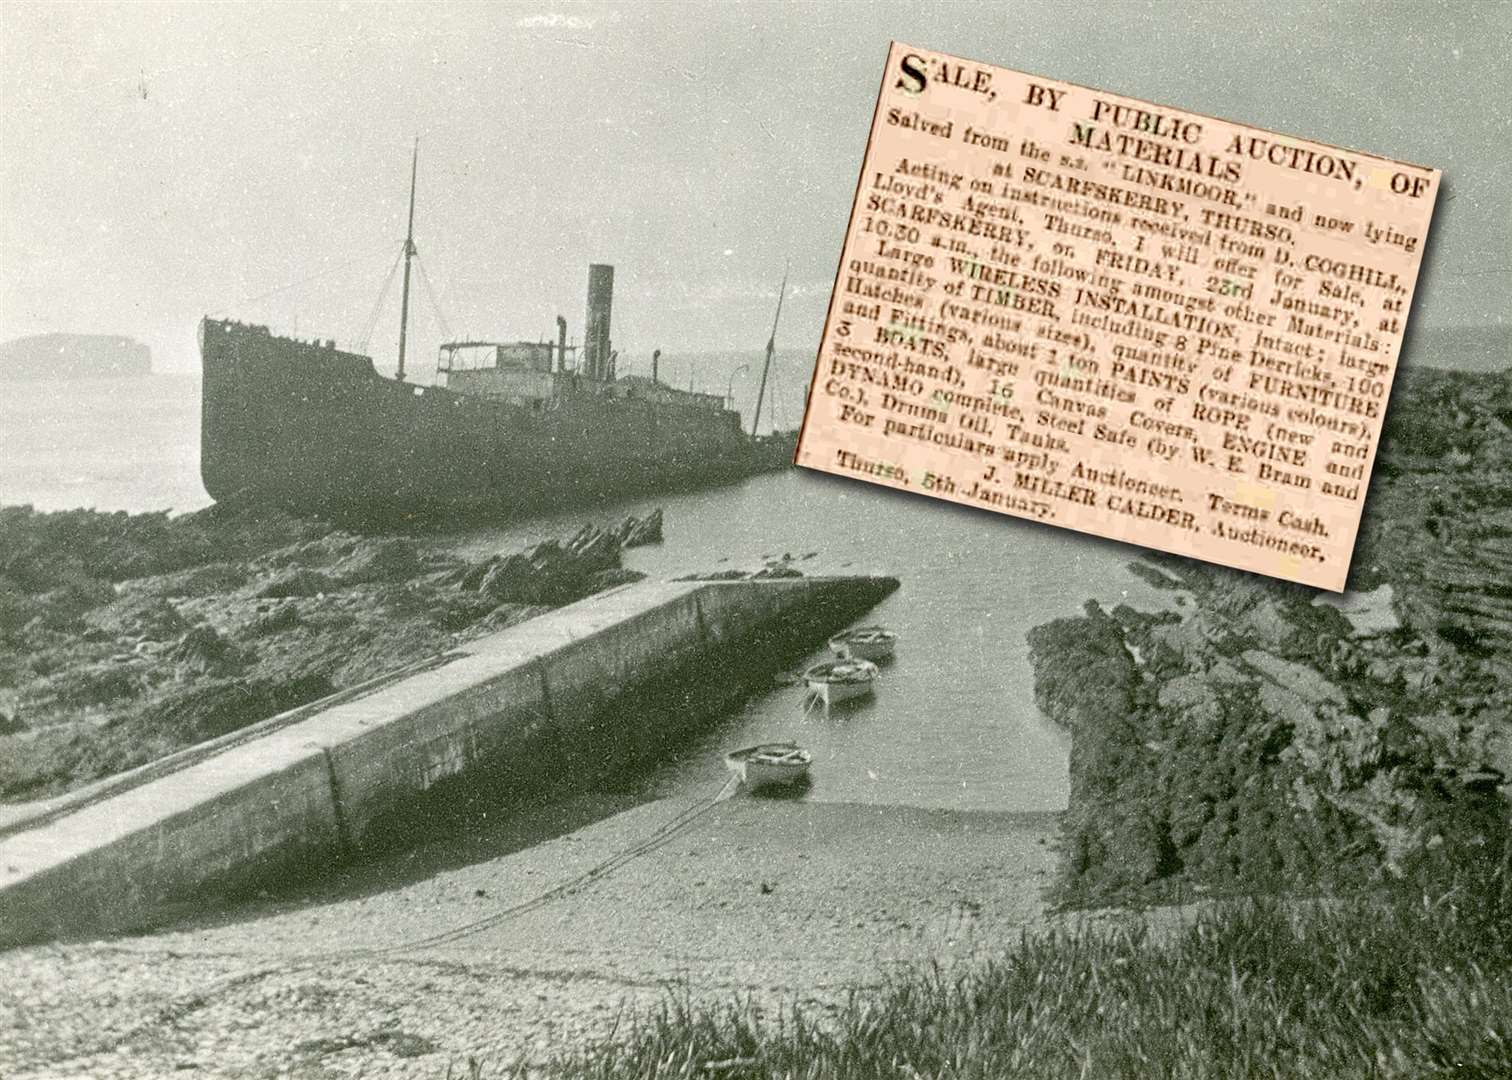 The Linkmoor beached at Scarfskerry Harbour with (inset) the salvage sales advert.